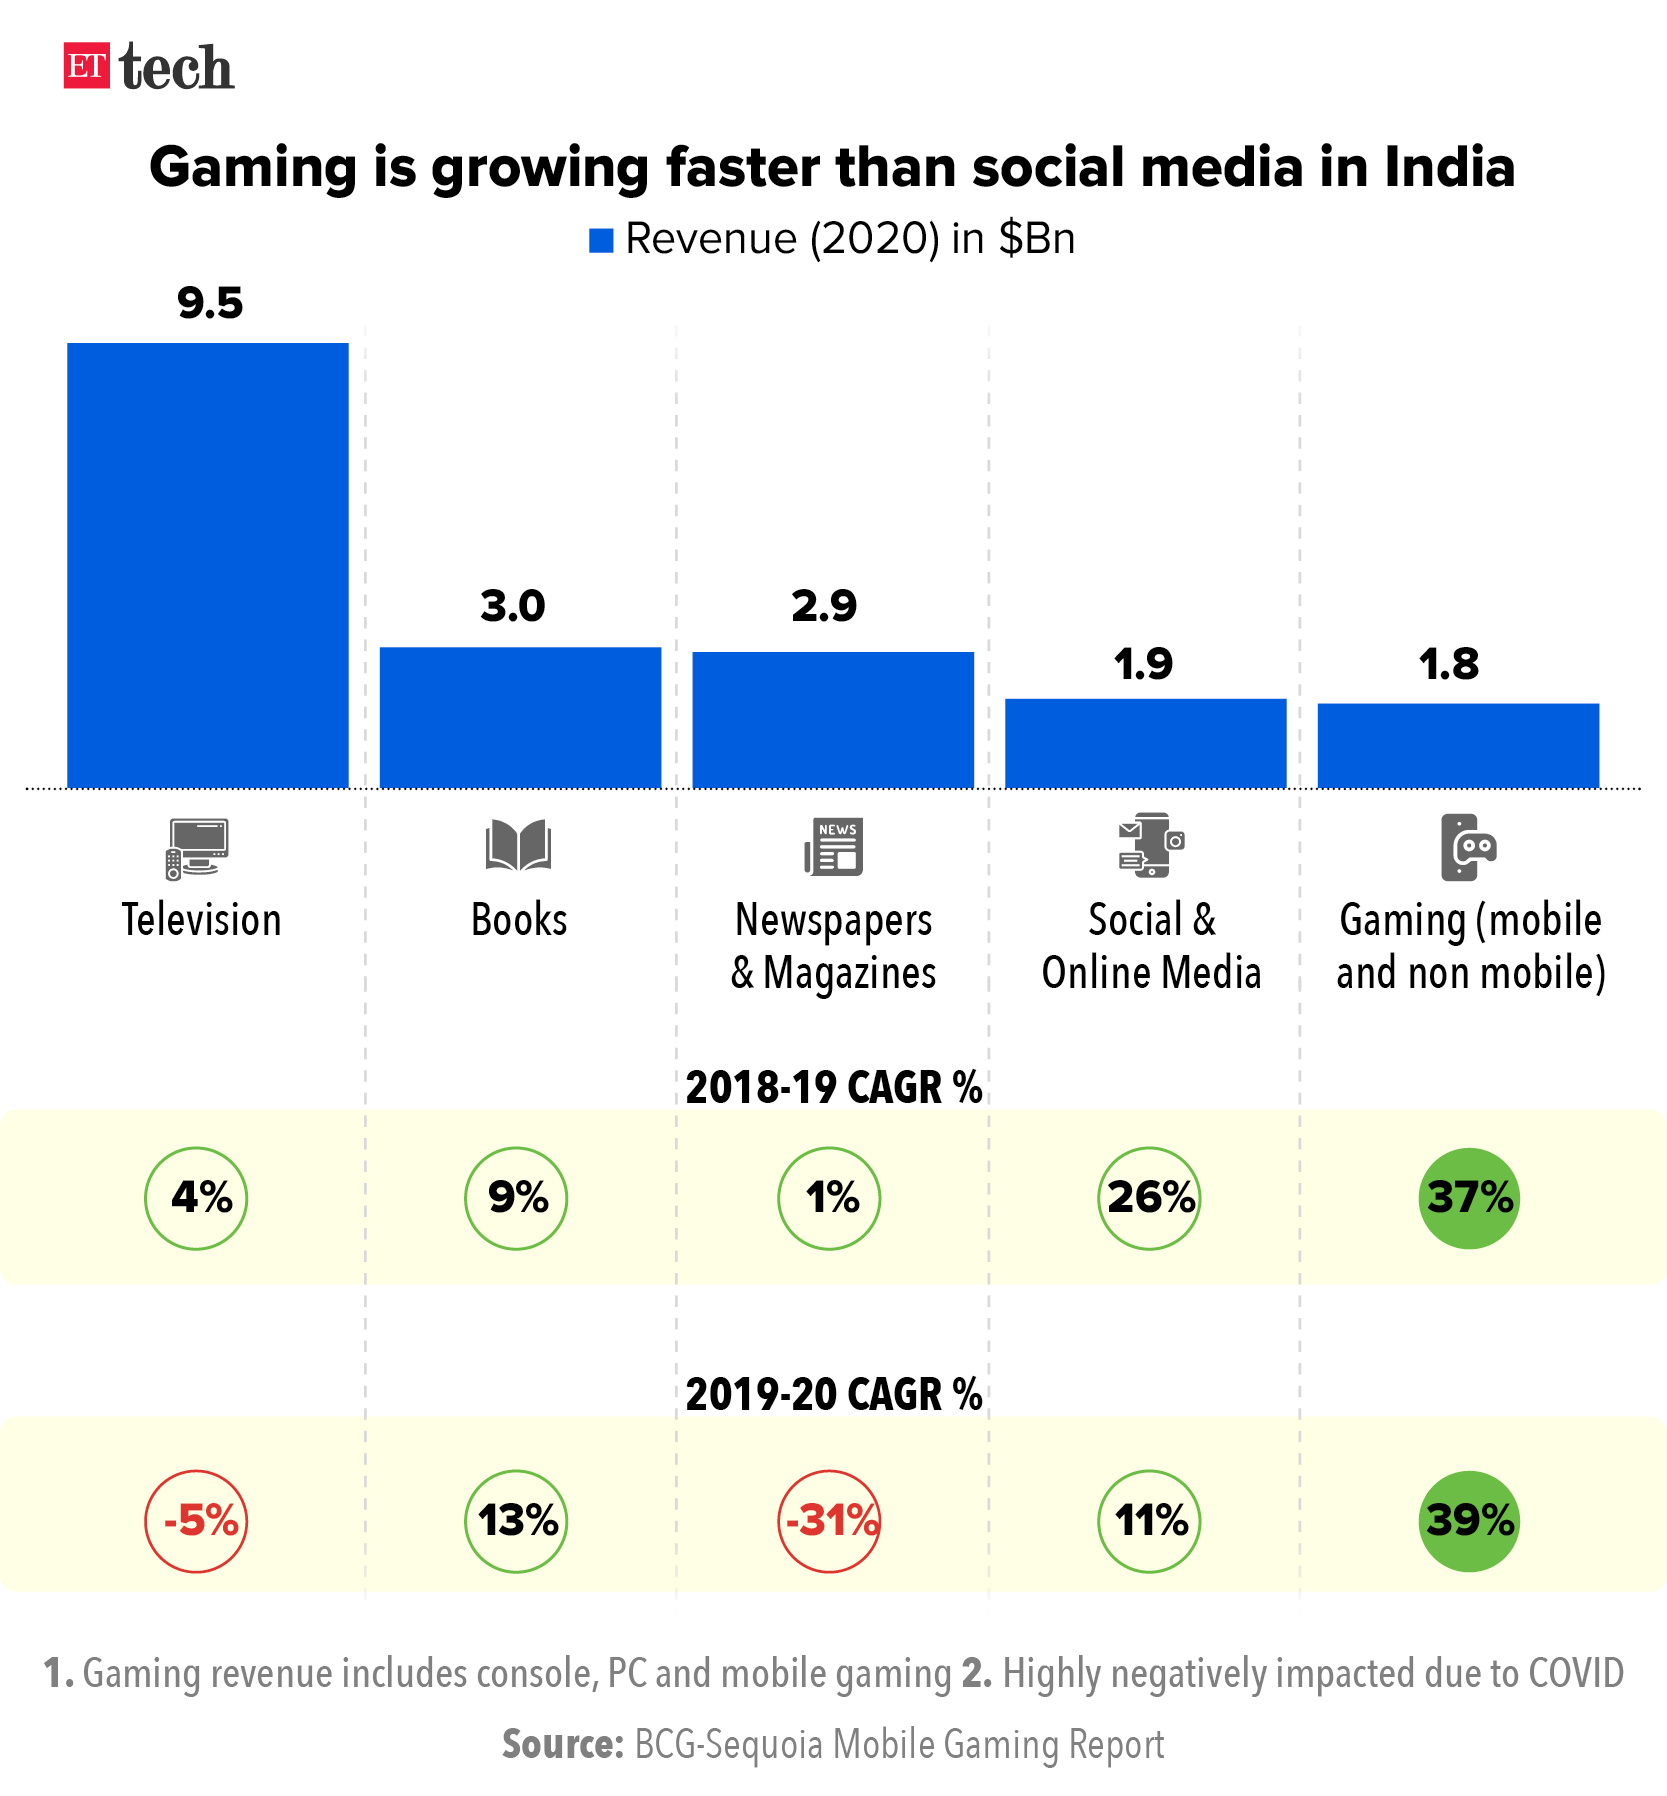 Gaming is growing faster than social media in India